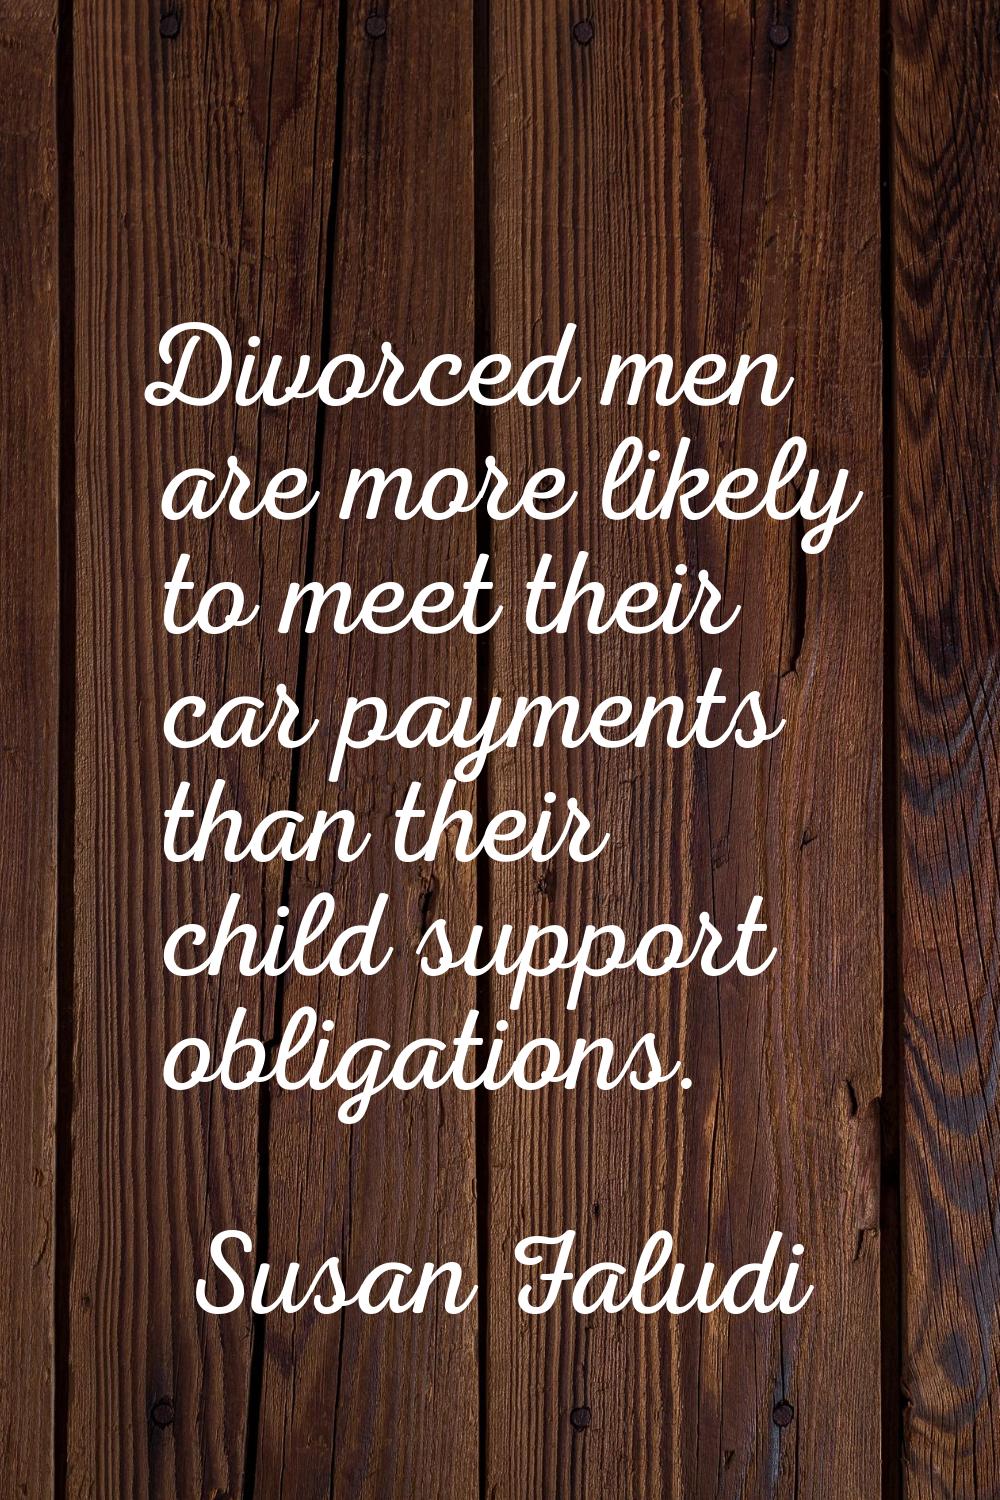 Divorced men are more likely to meet their car payments than their child support obligations.